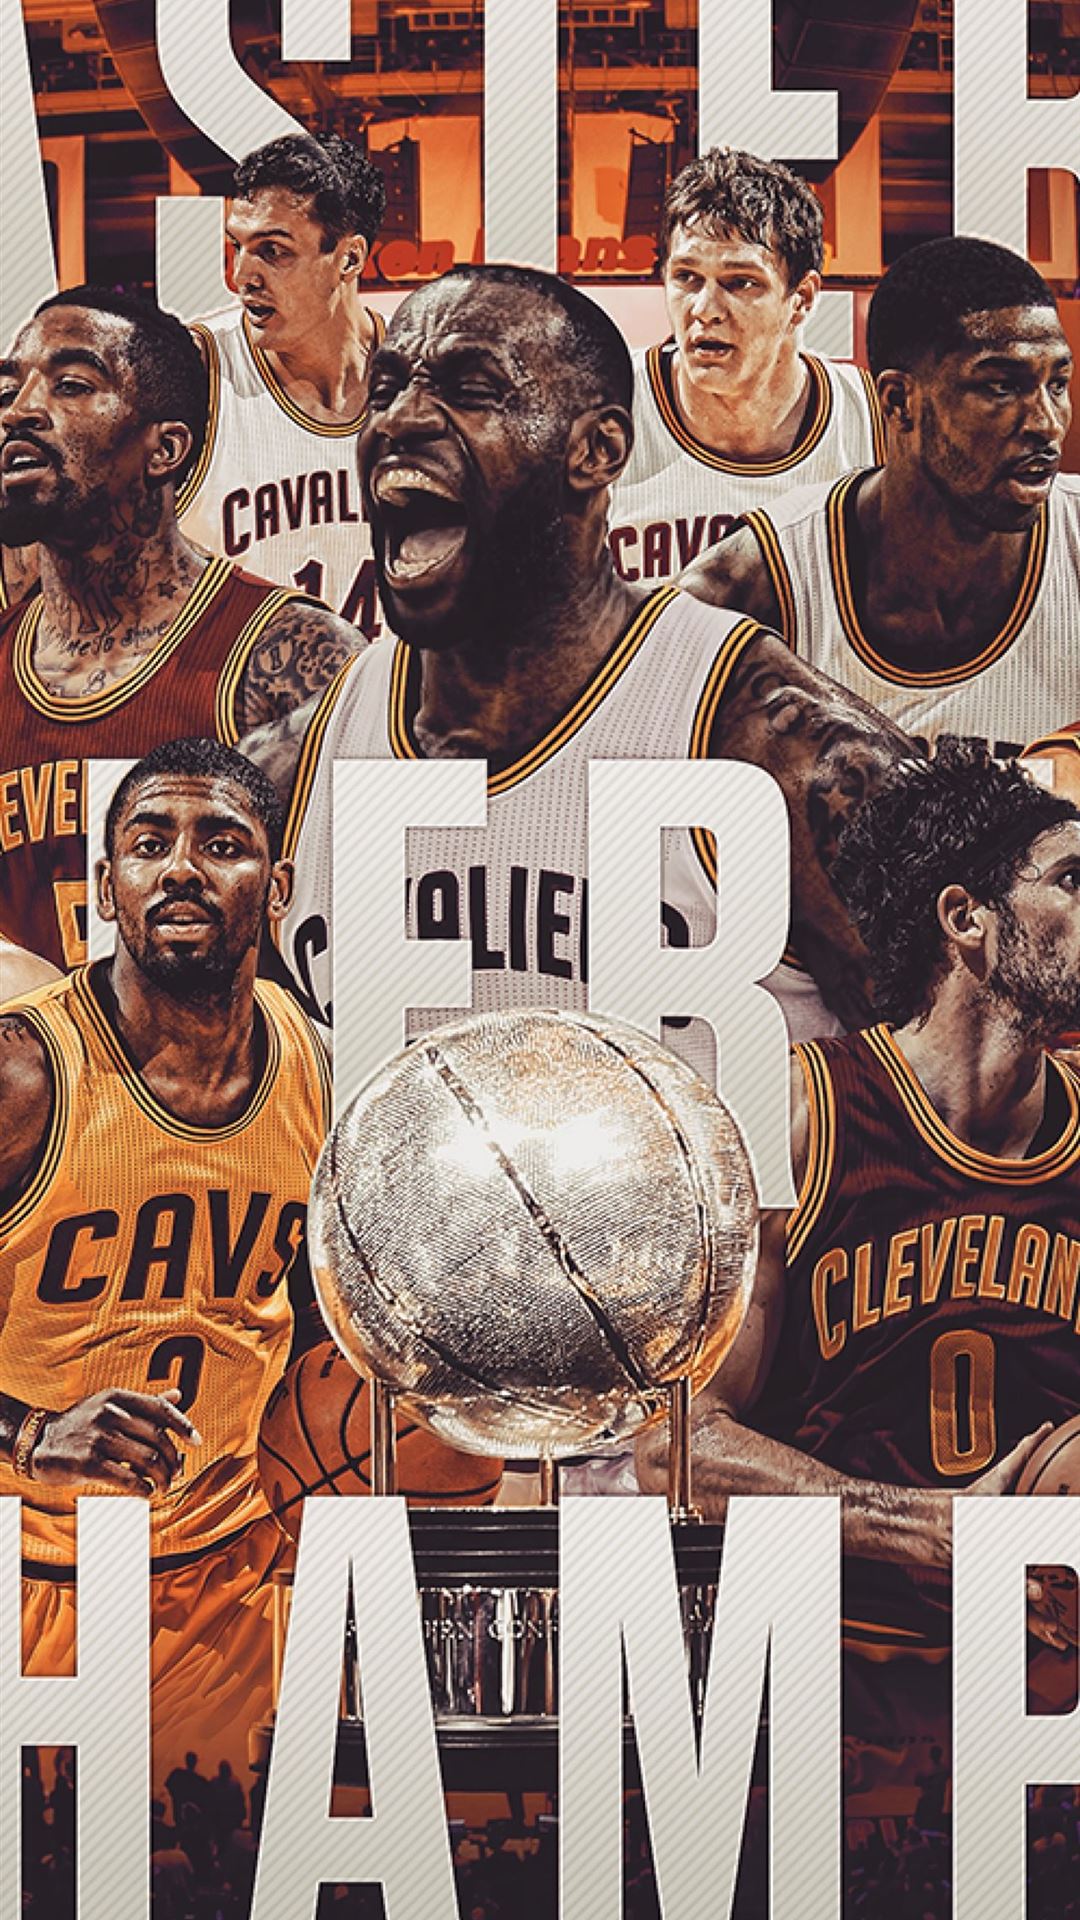 Cleveland Cavaliers Iphone 6 Wallpapers